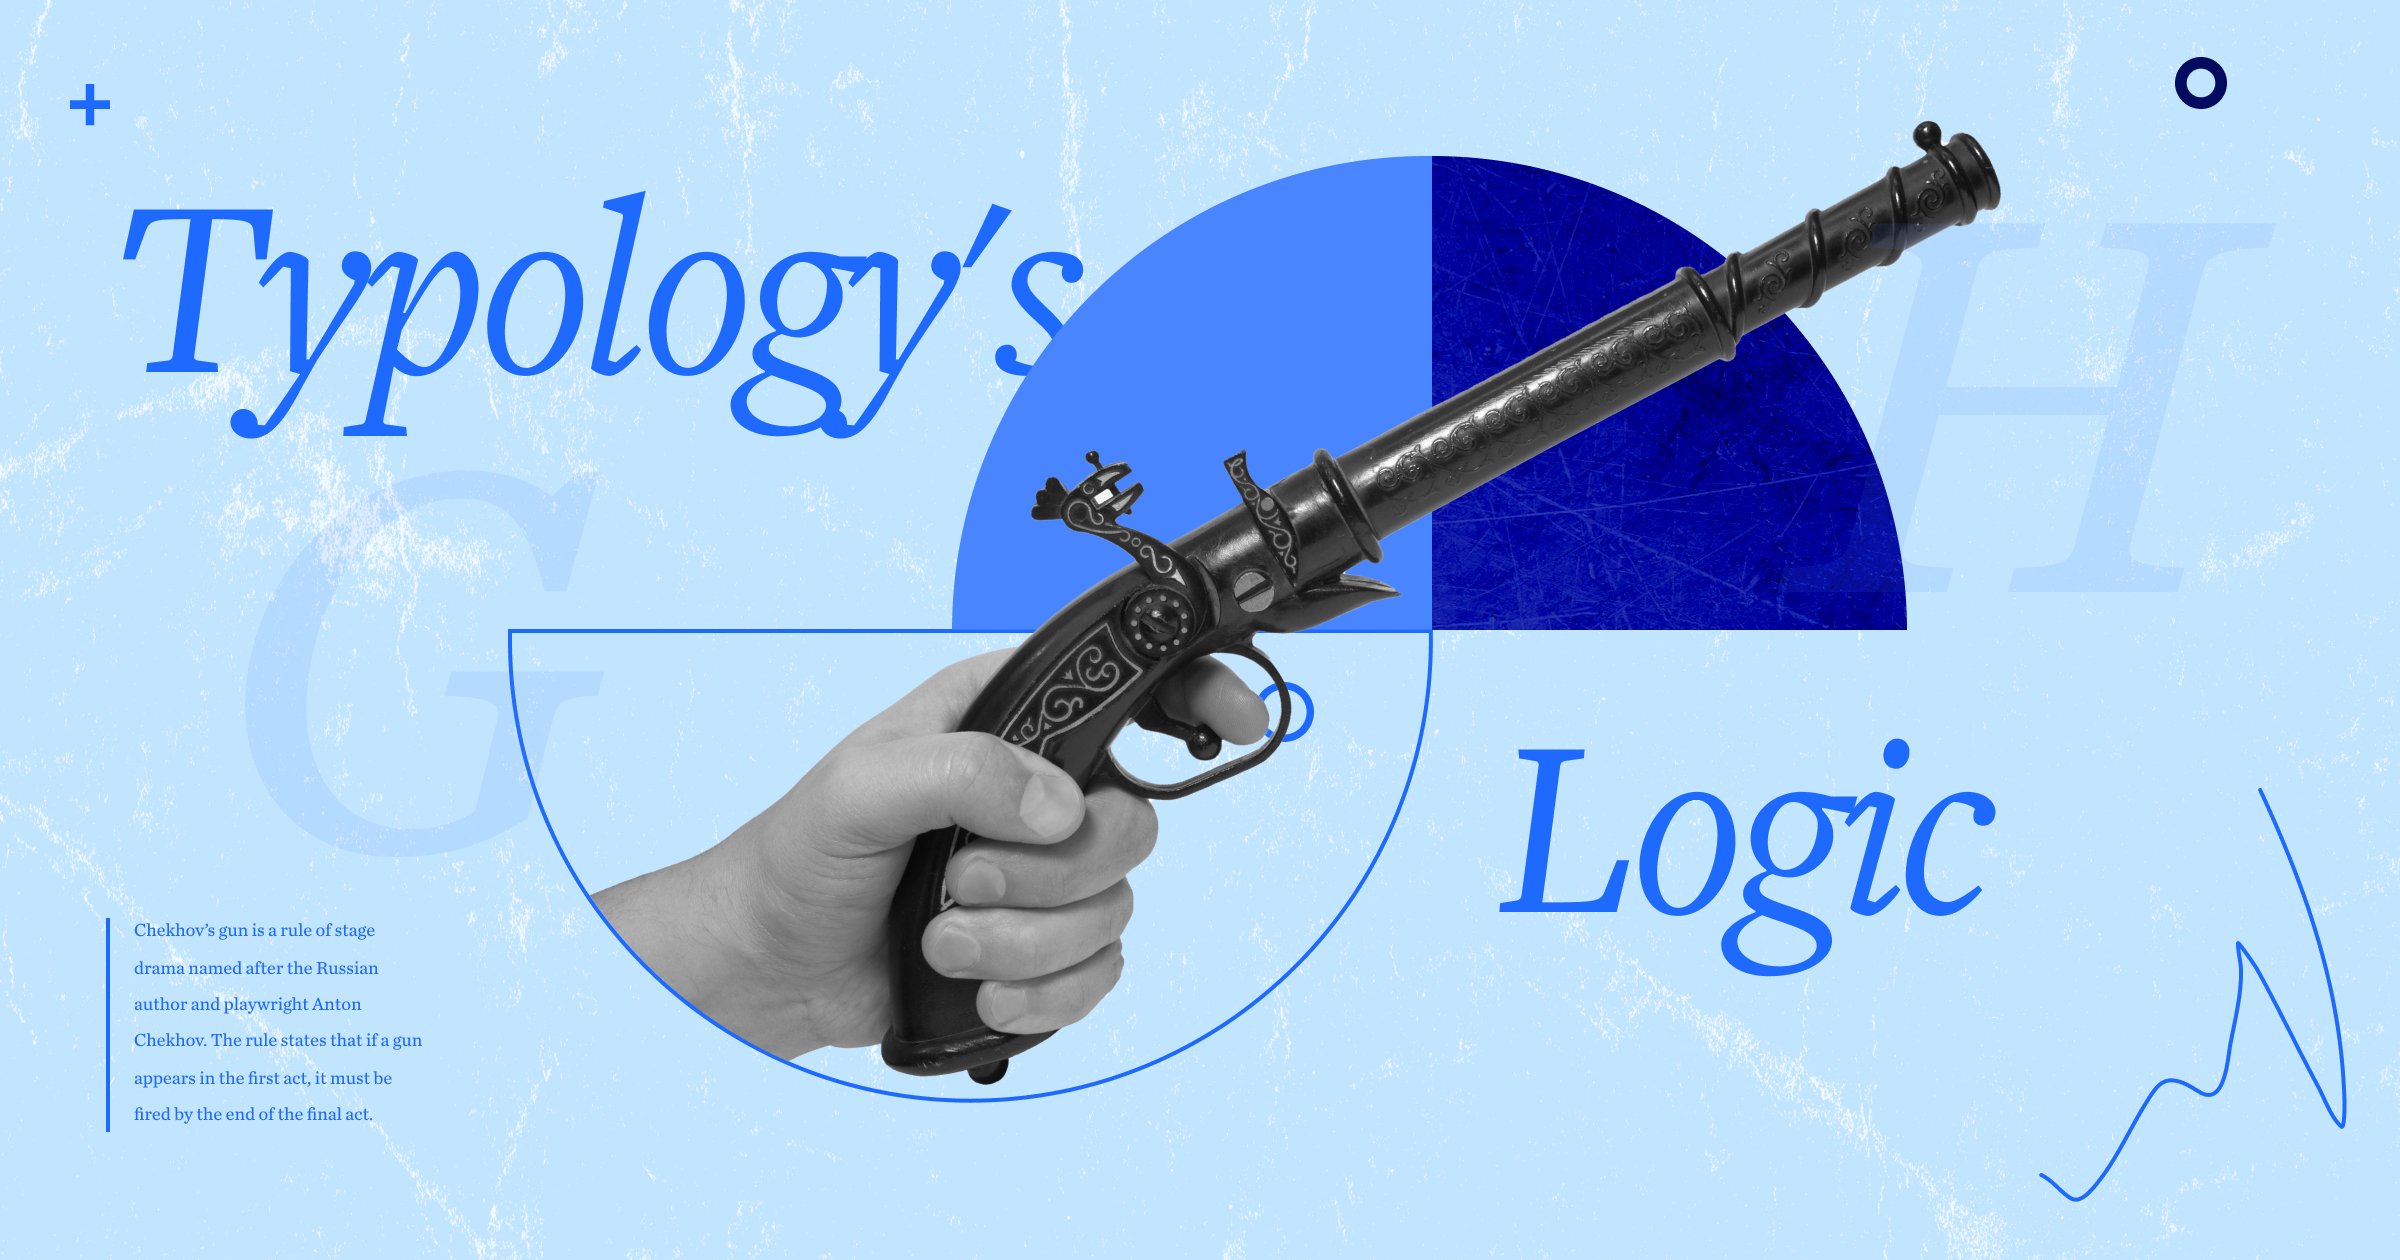 Antique gun being drawn, with Typology's Logic in blue font representing Chekov's gun. A portion of the article is displayed on lower left.